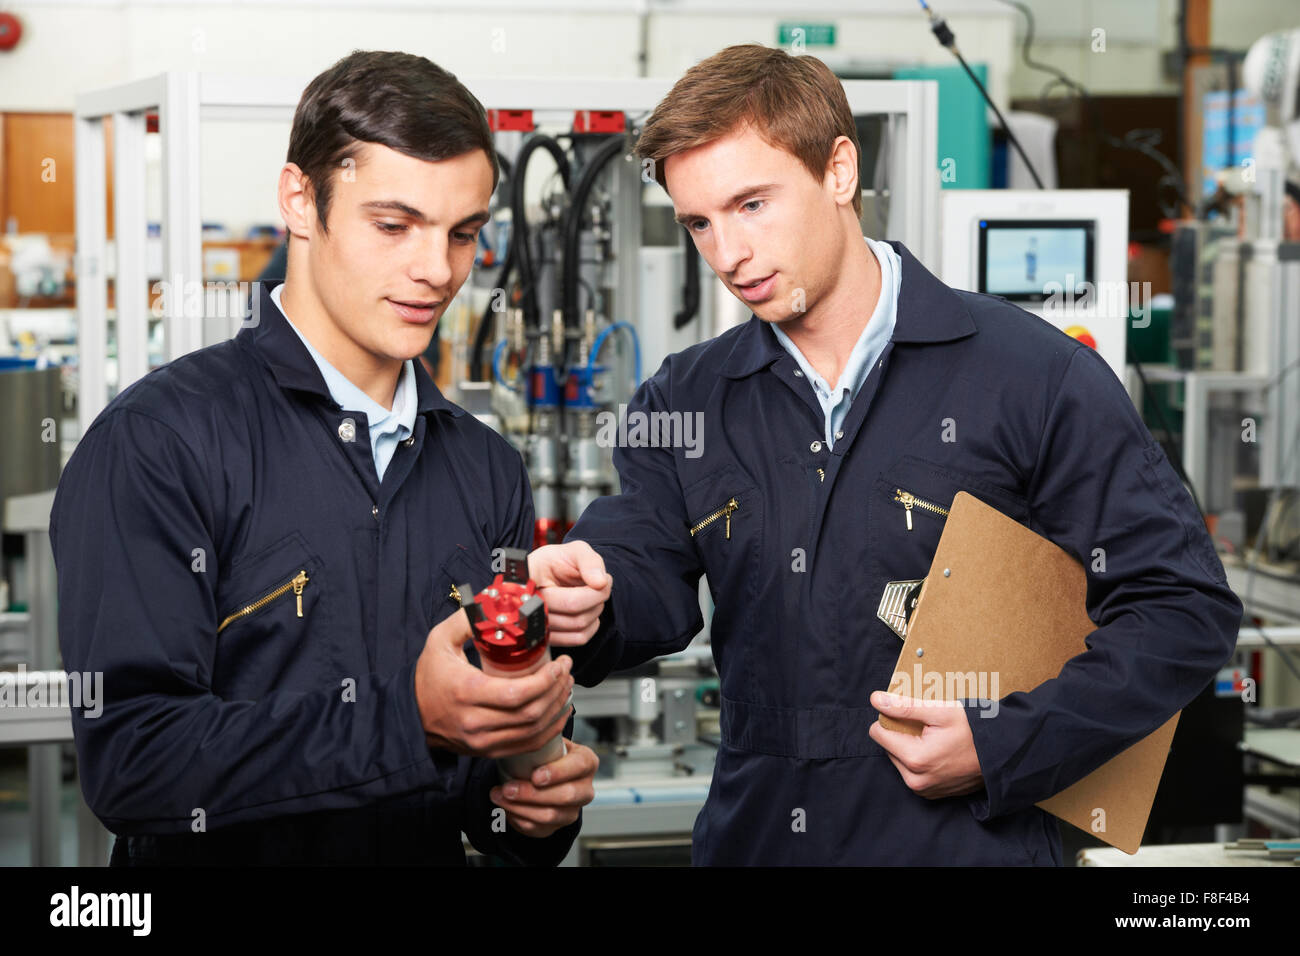 Engineer And Trainee Discussing Component In Factory Stock Photo